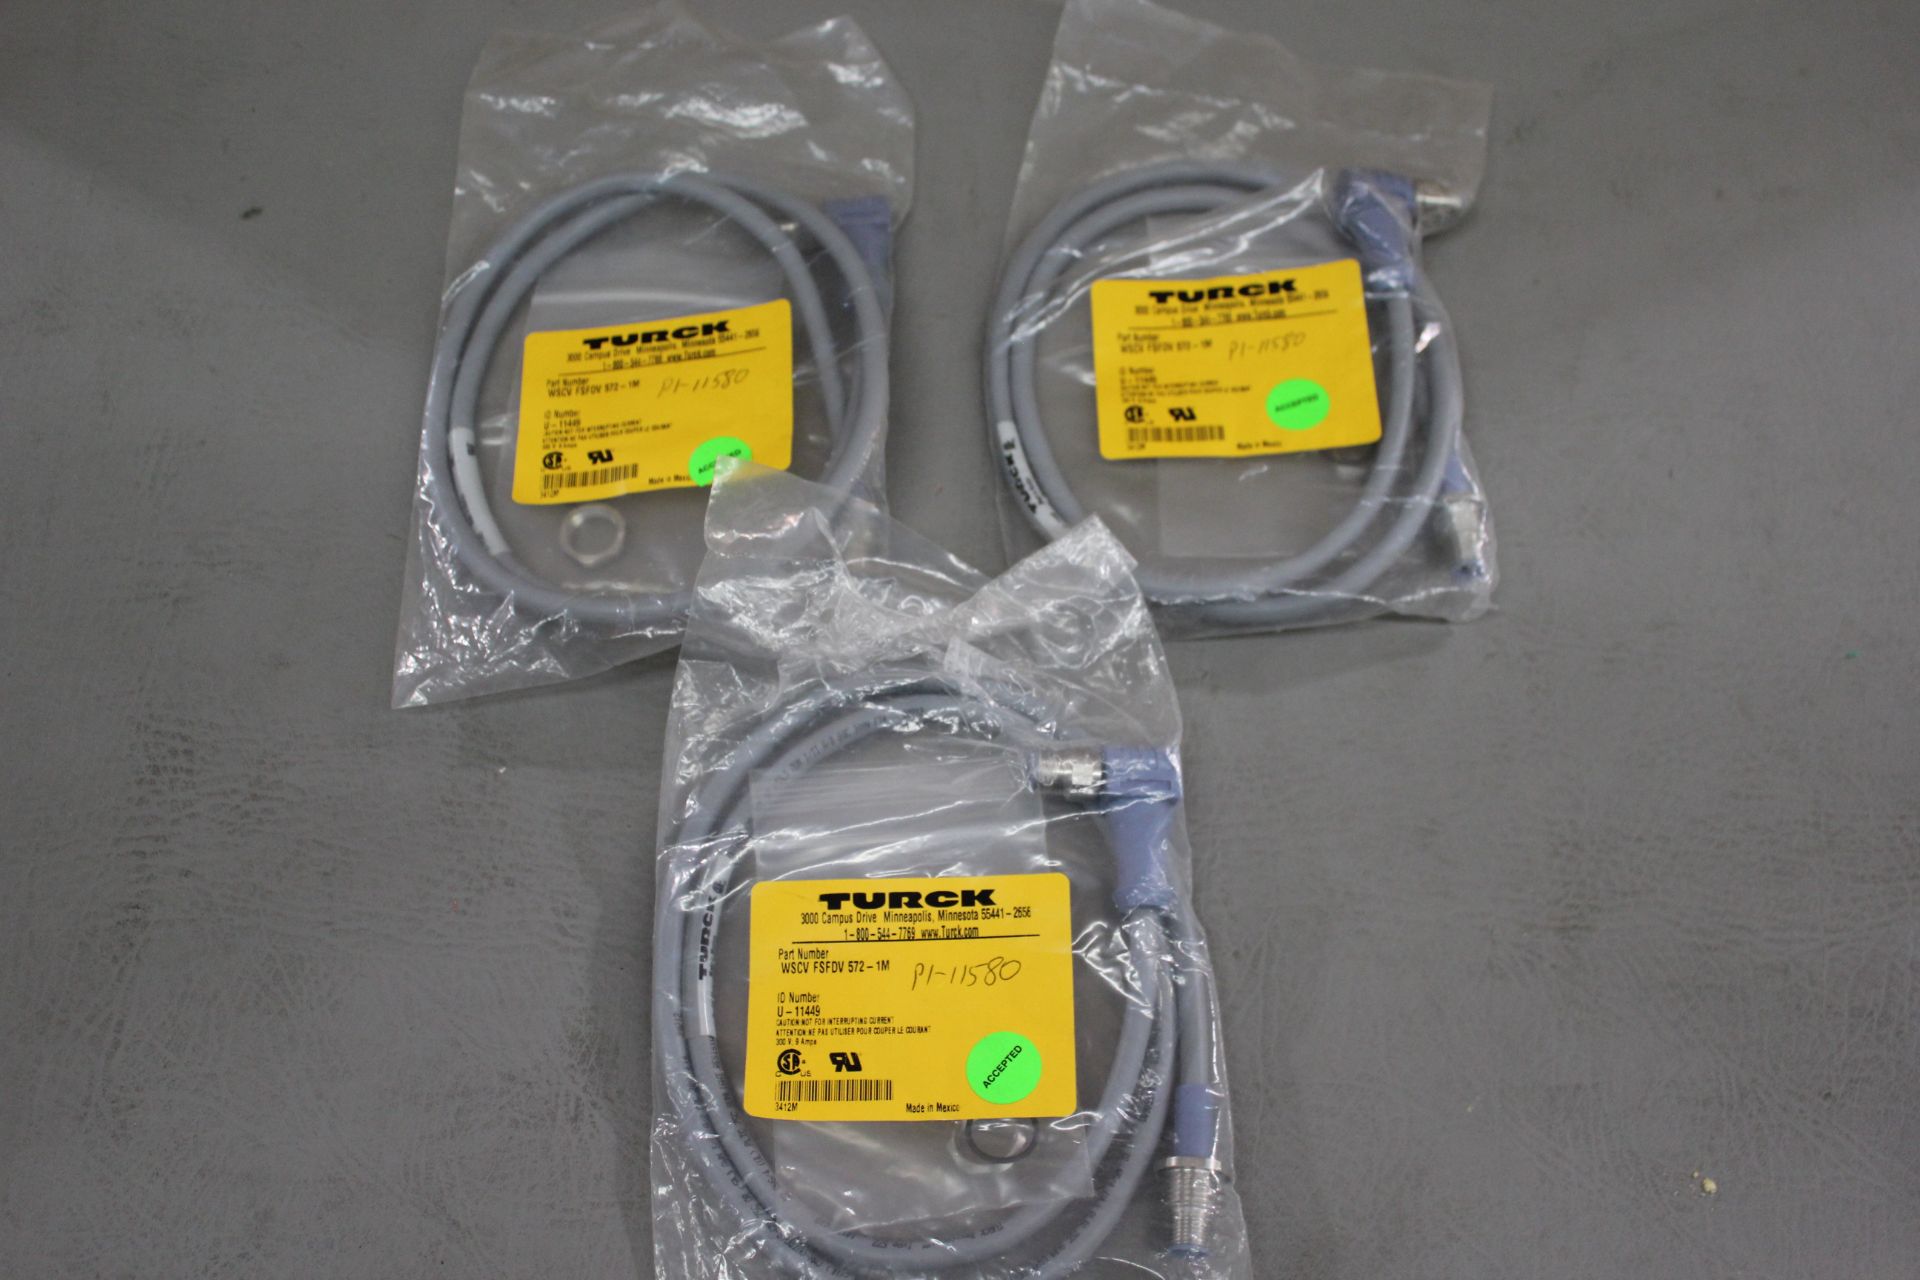 LOT OF NEW TURCK CABLES